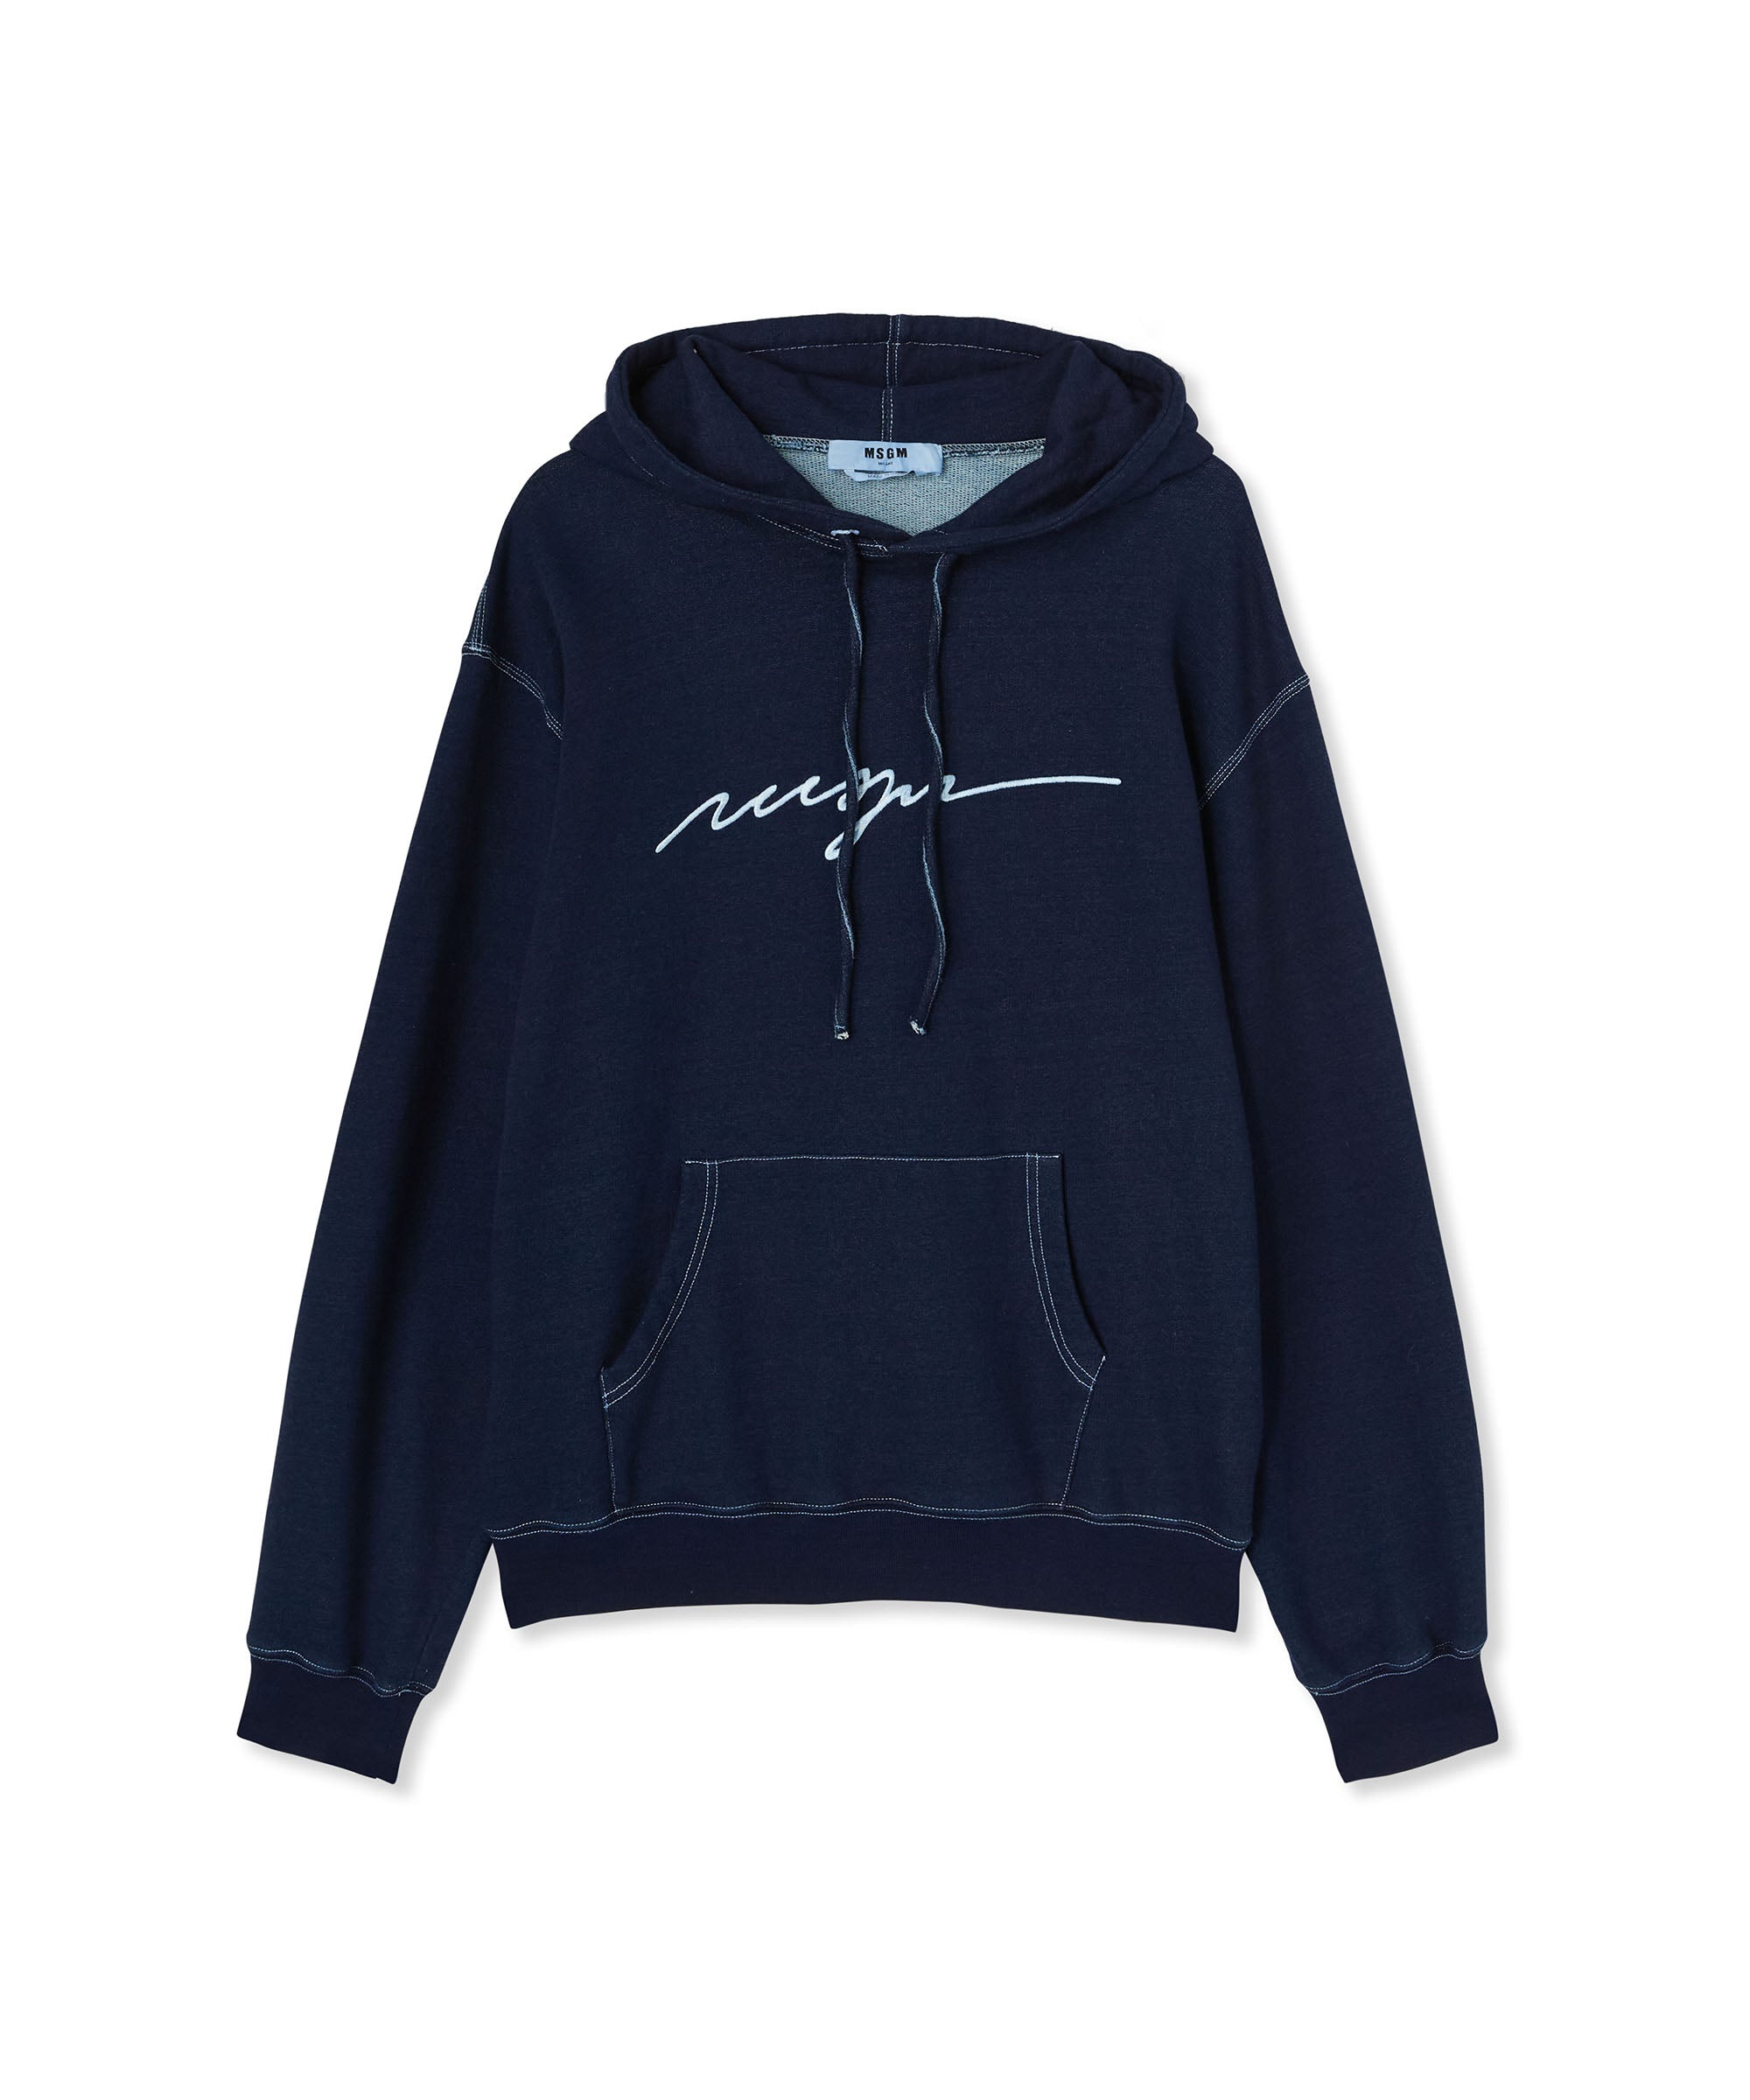 Hooded sweatshirt with embroidered cursive logo - 1